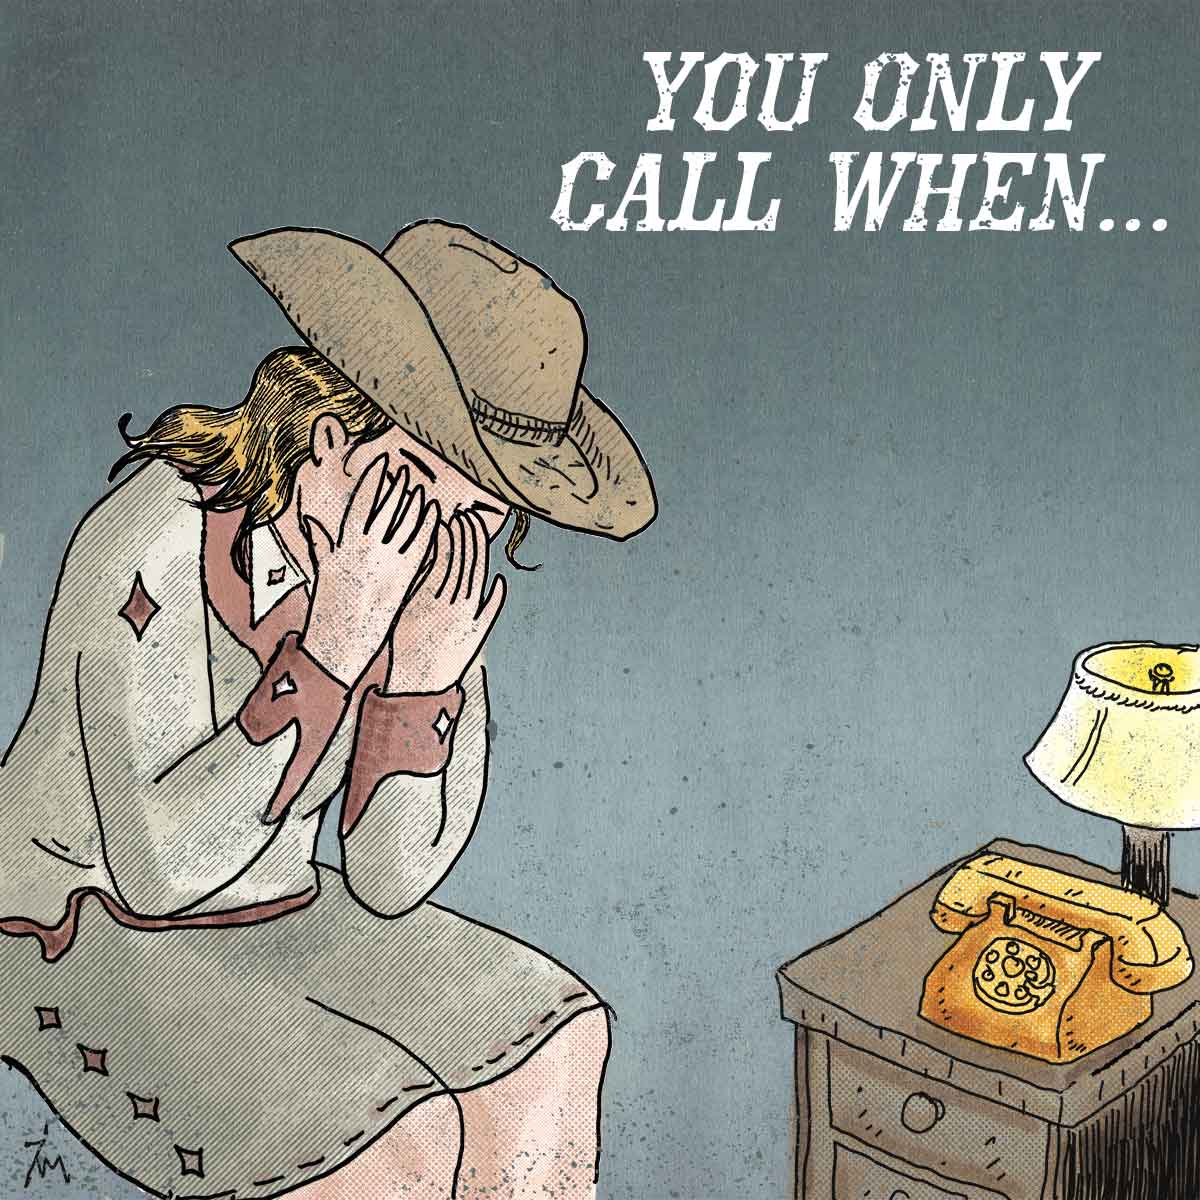 Illustration of woman in country style clothing crying by a phone.